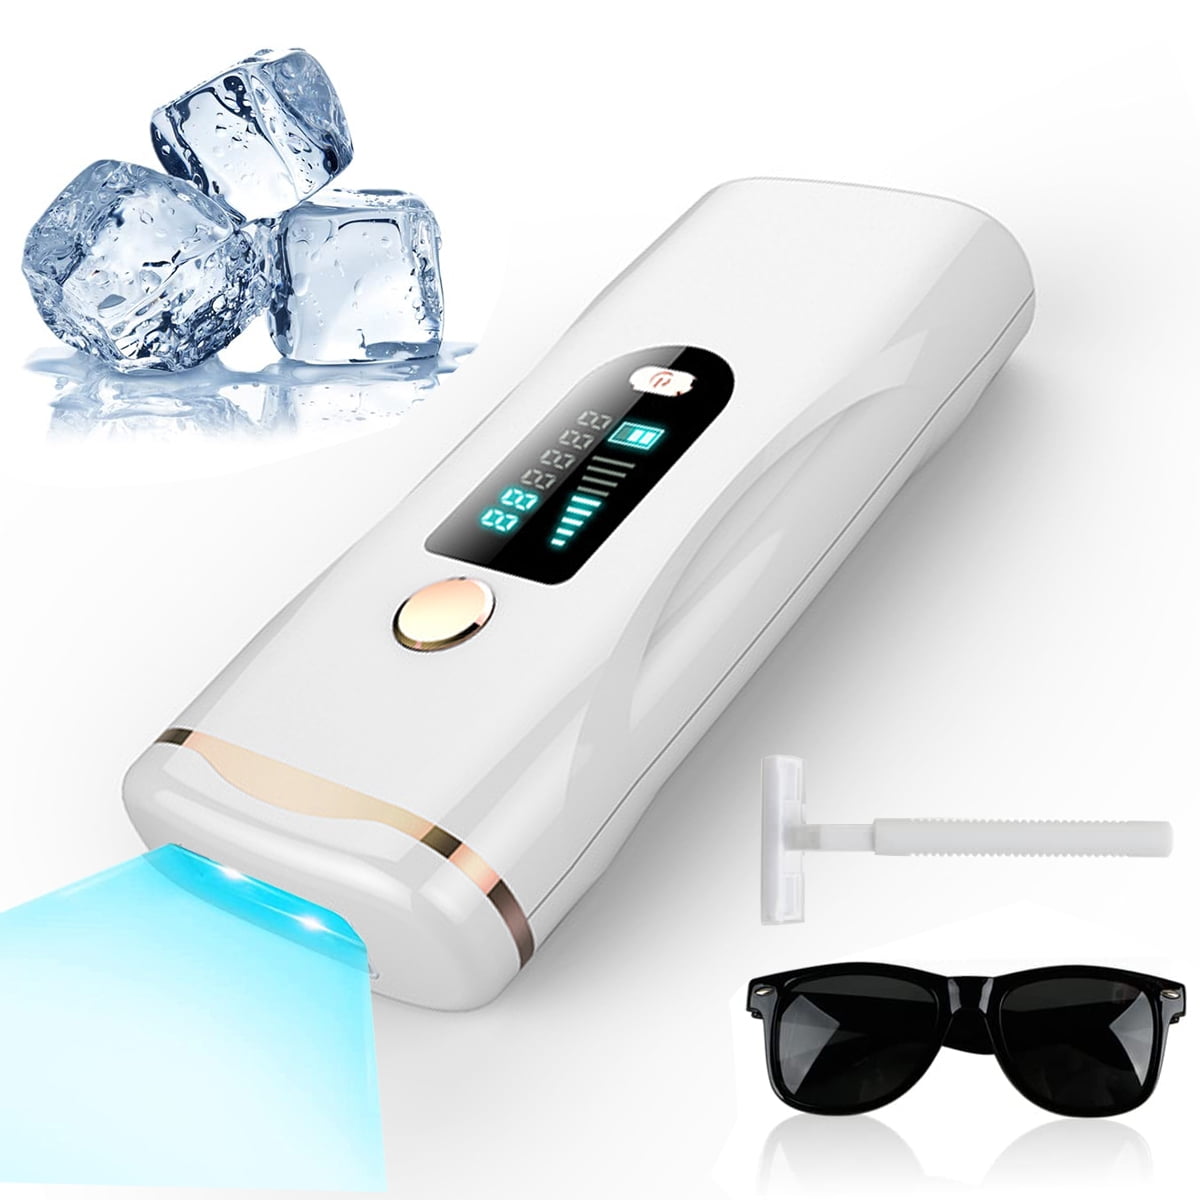 Laser IPL Hair Removal, IPL Hair Removal for Women and Men Permanent,  999999 Flashes, 3-in-1 At-Home Hair Removal Device for Facial Legs Arms Use